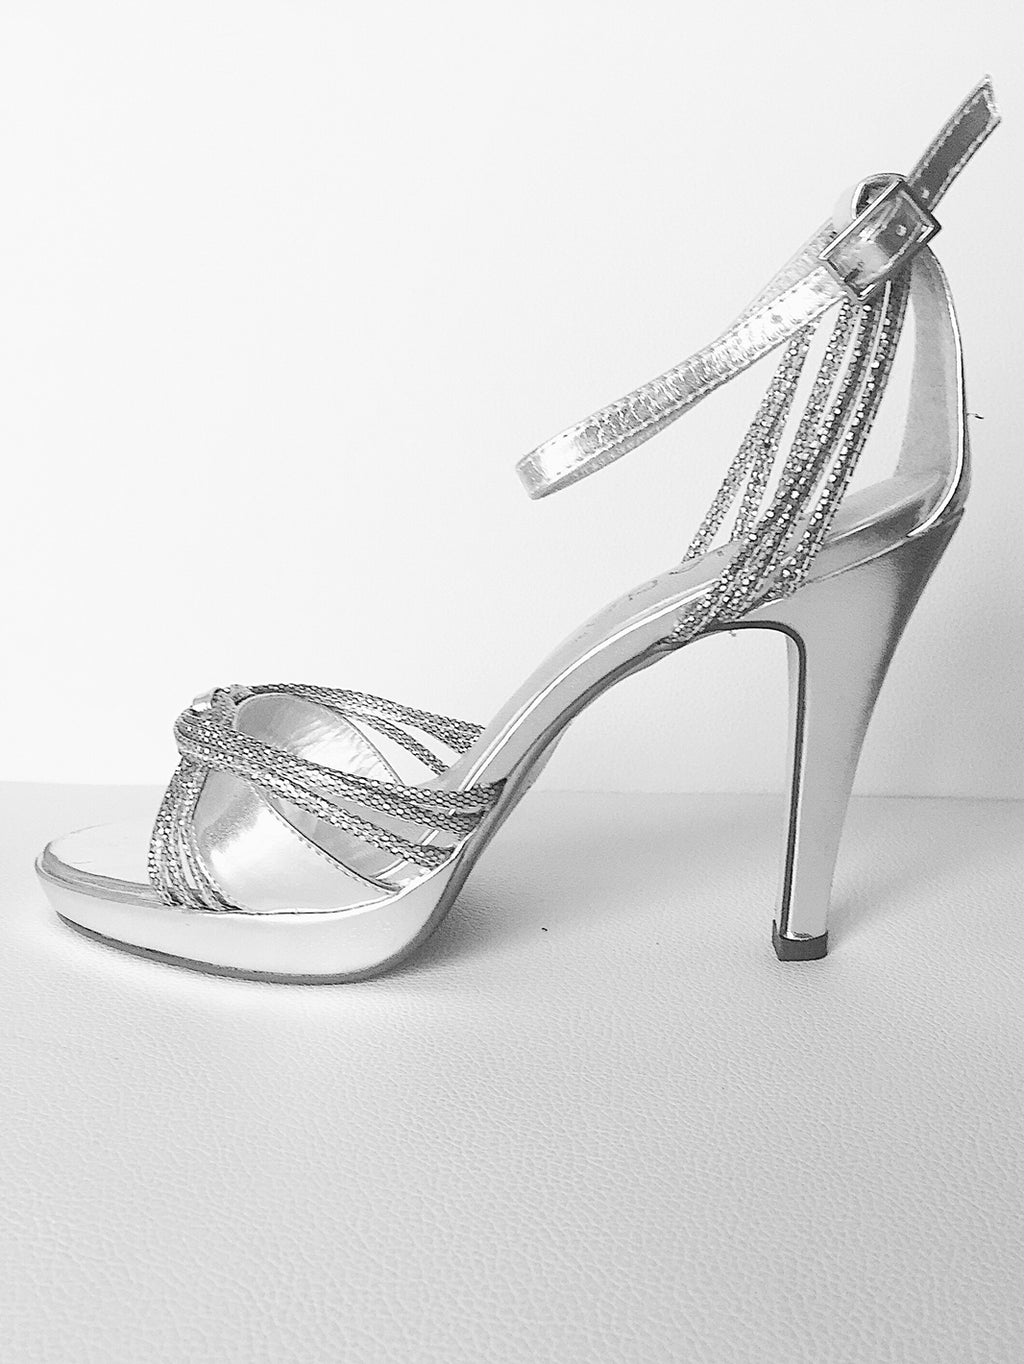 Silver high heels shoes